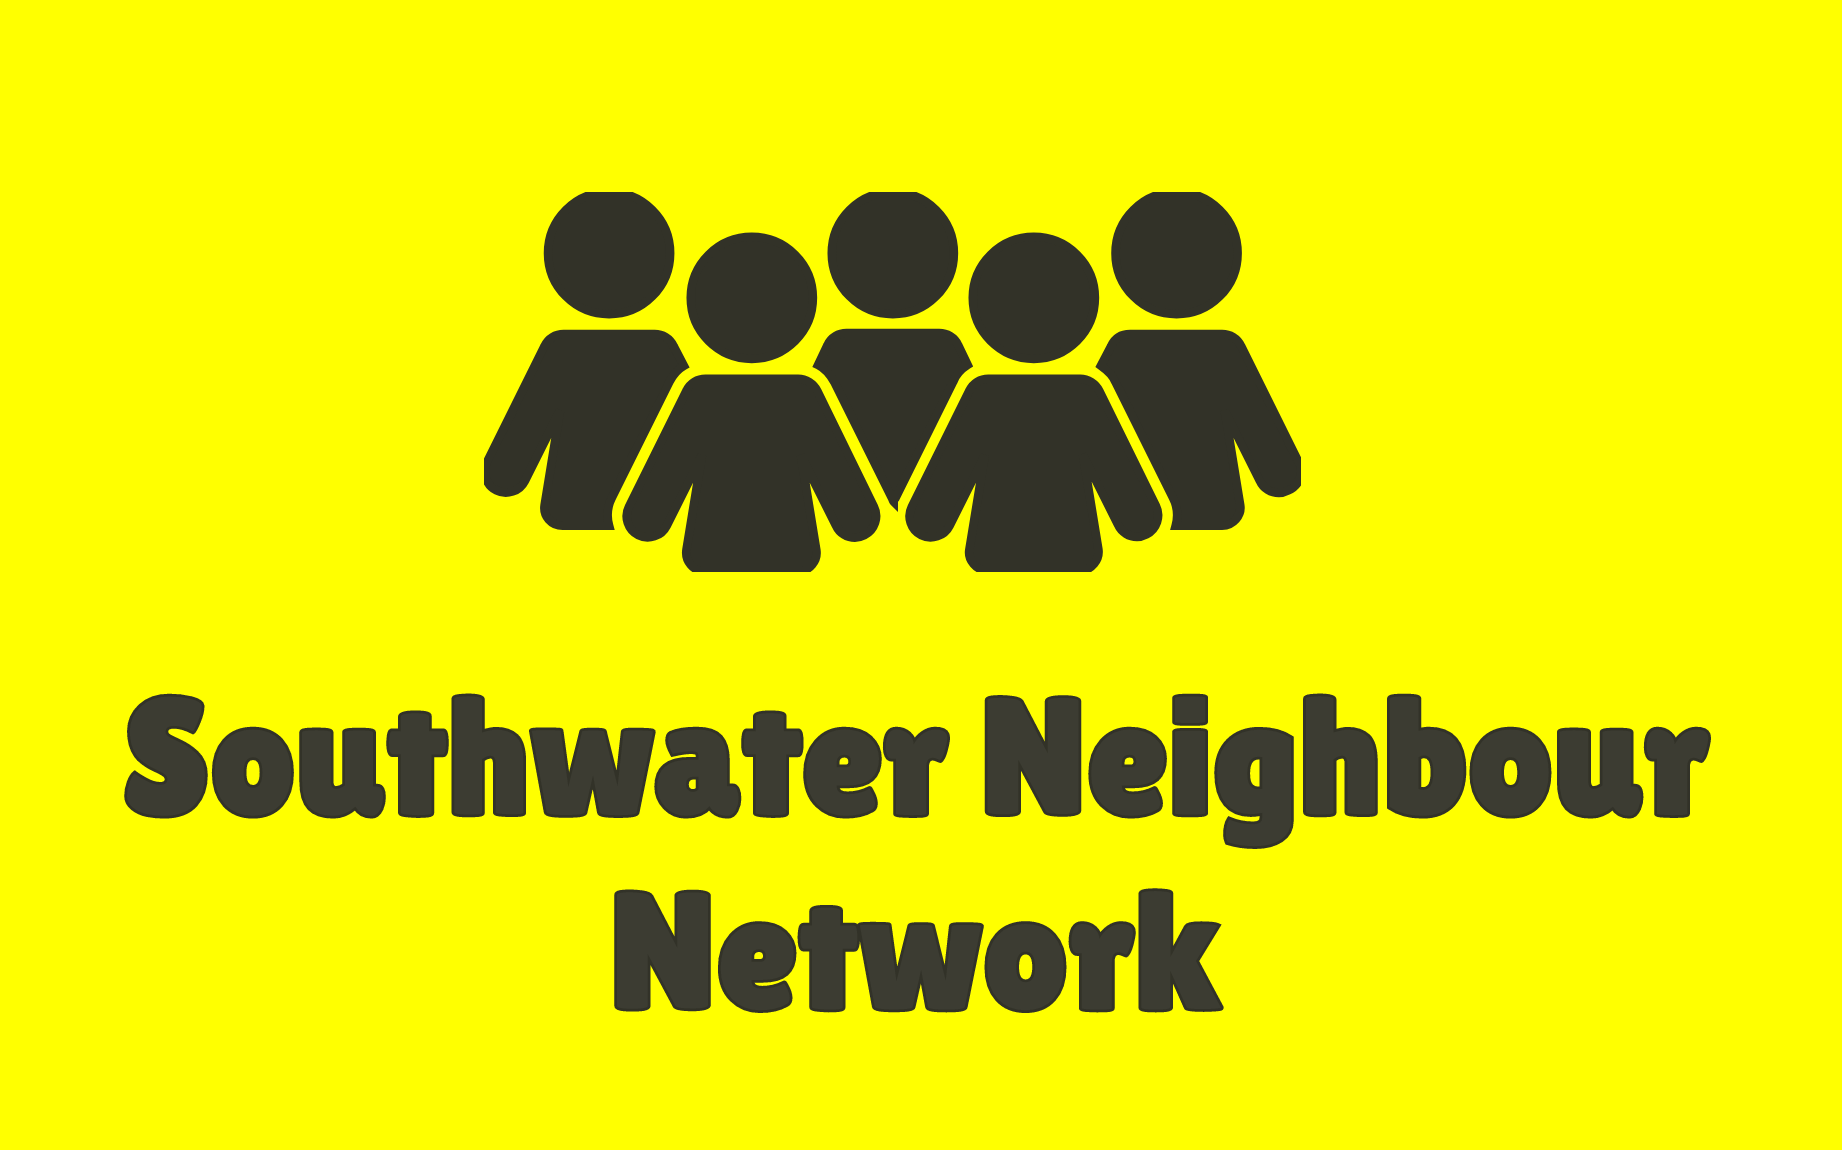 Southwater Neighbour Network